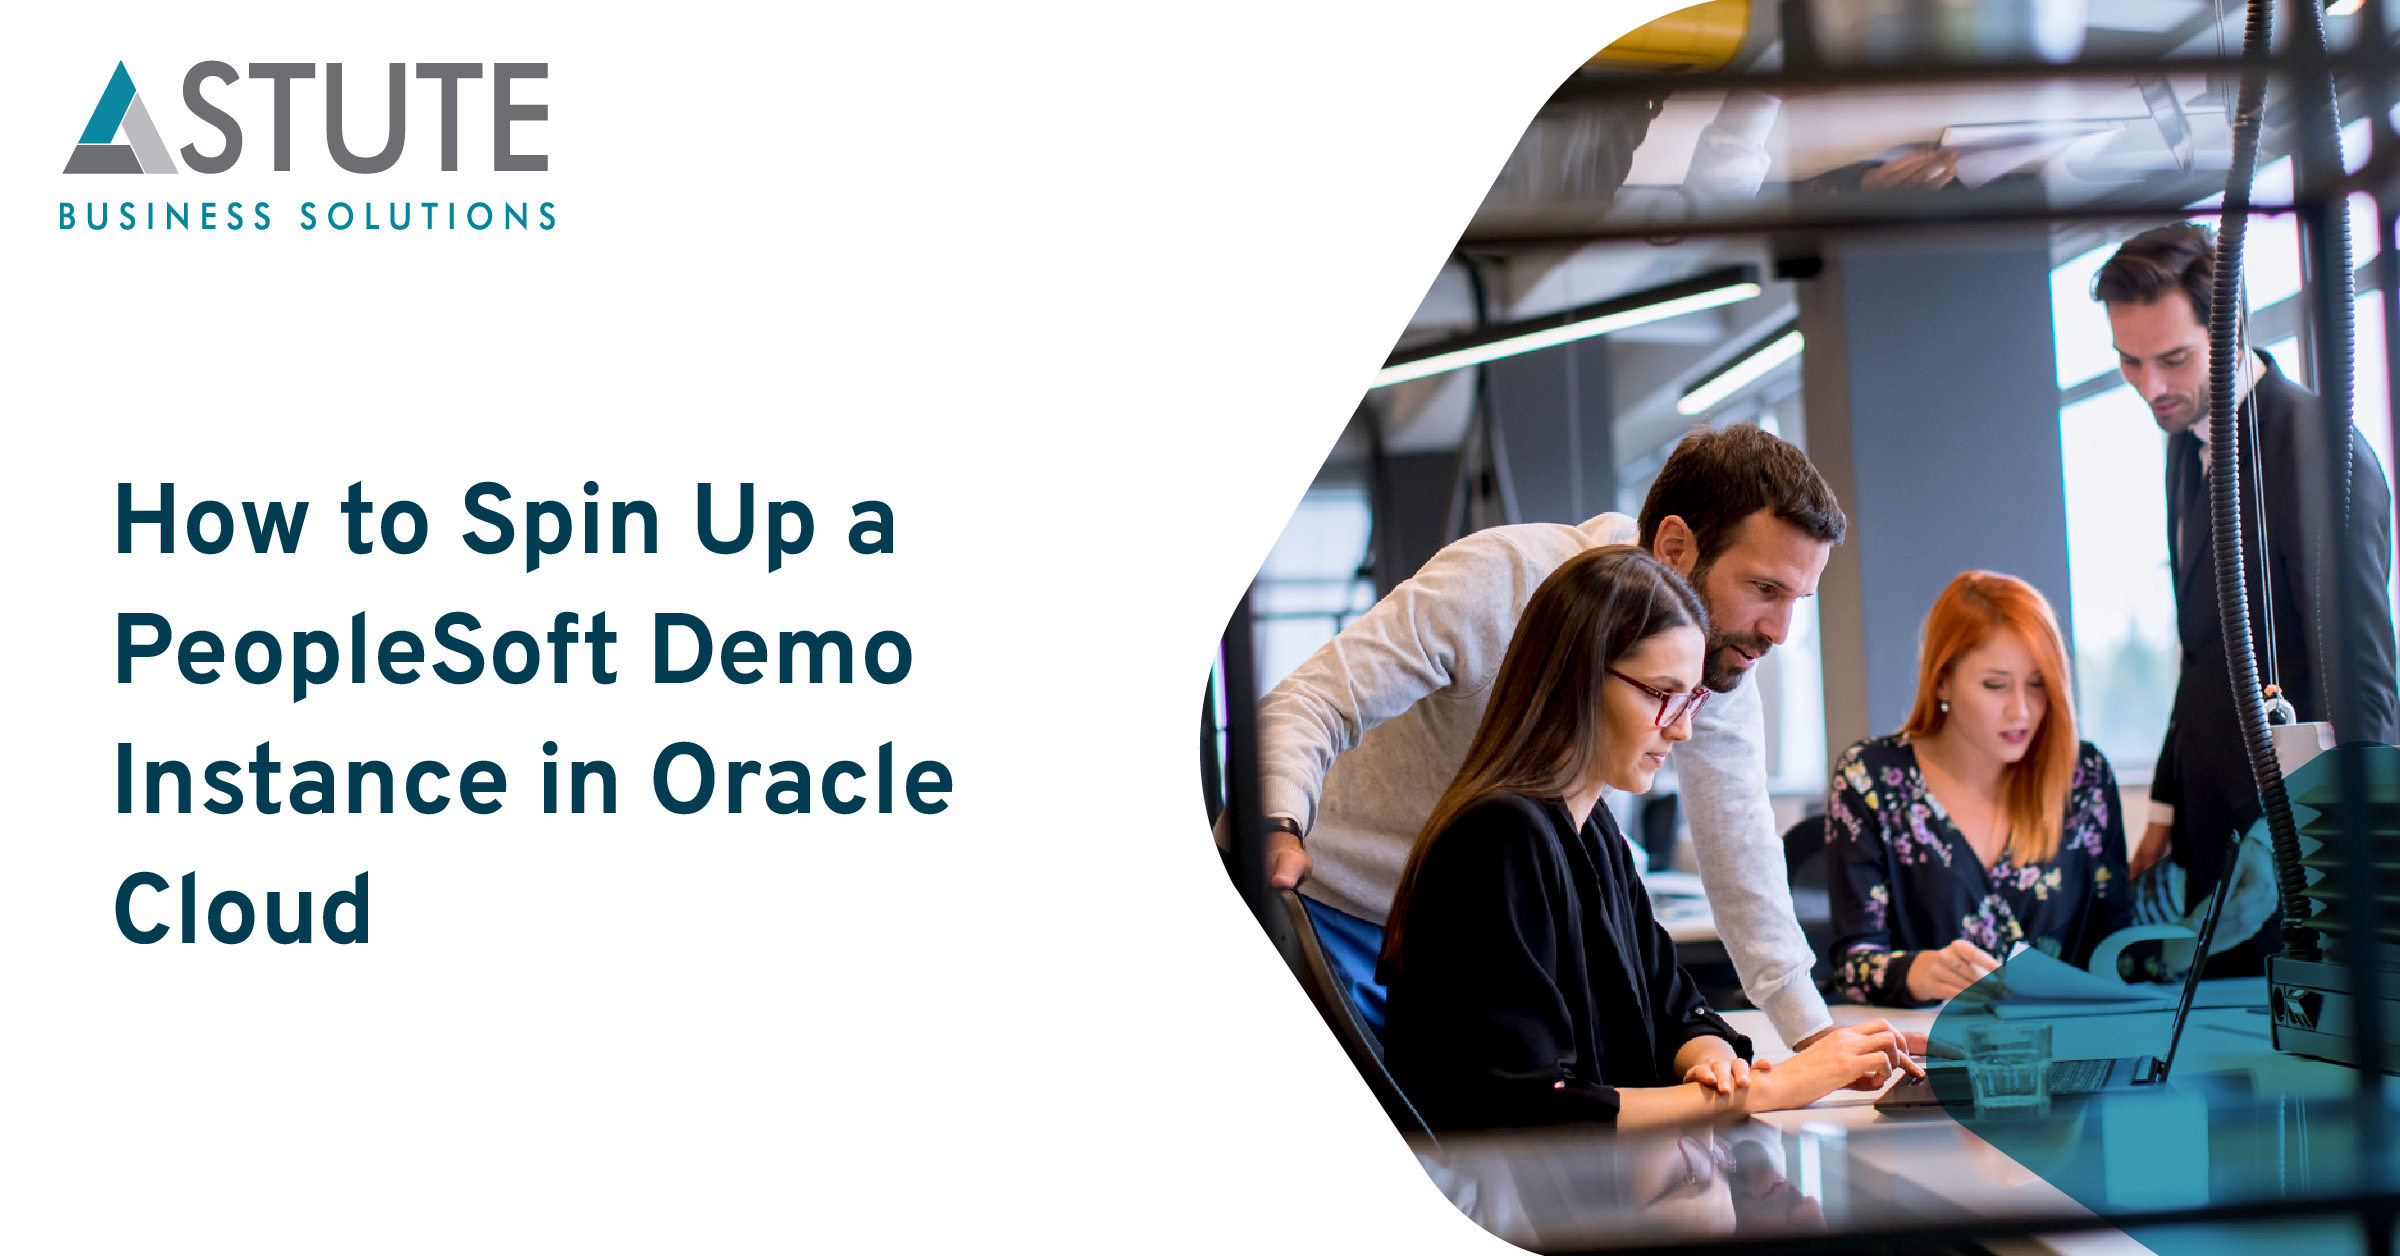 How to Spin Up a PeopleSoft Demo Instance in Oracle Cloud